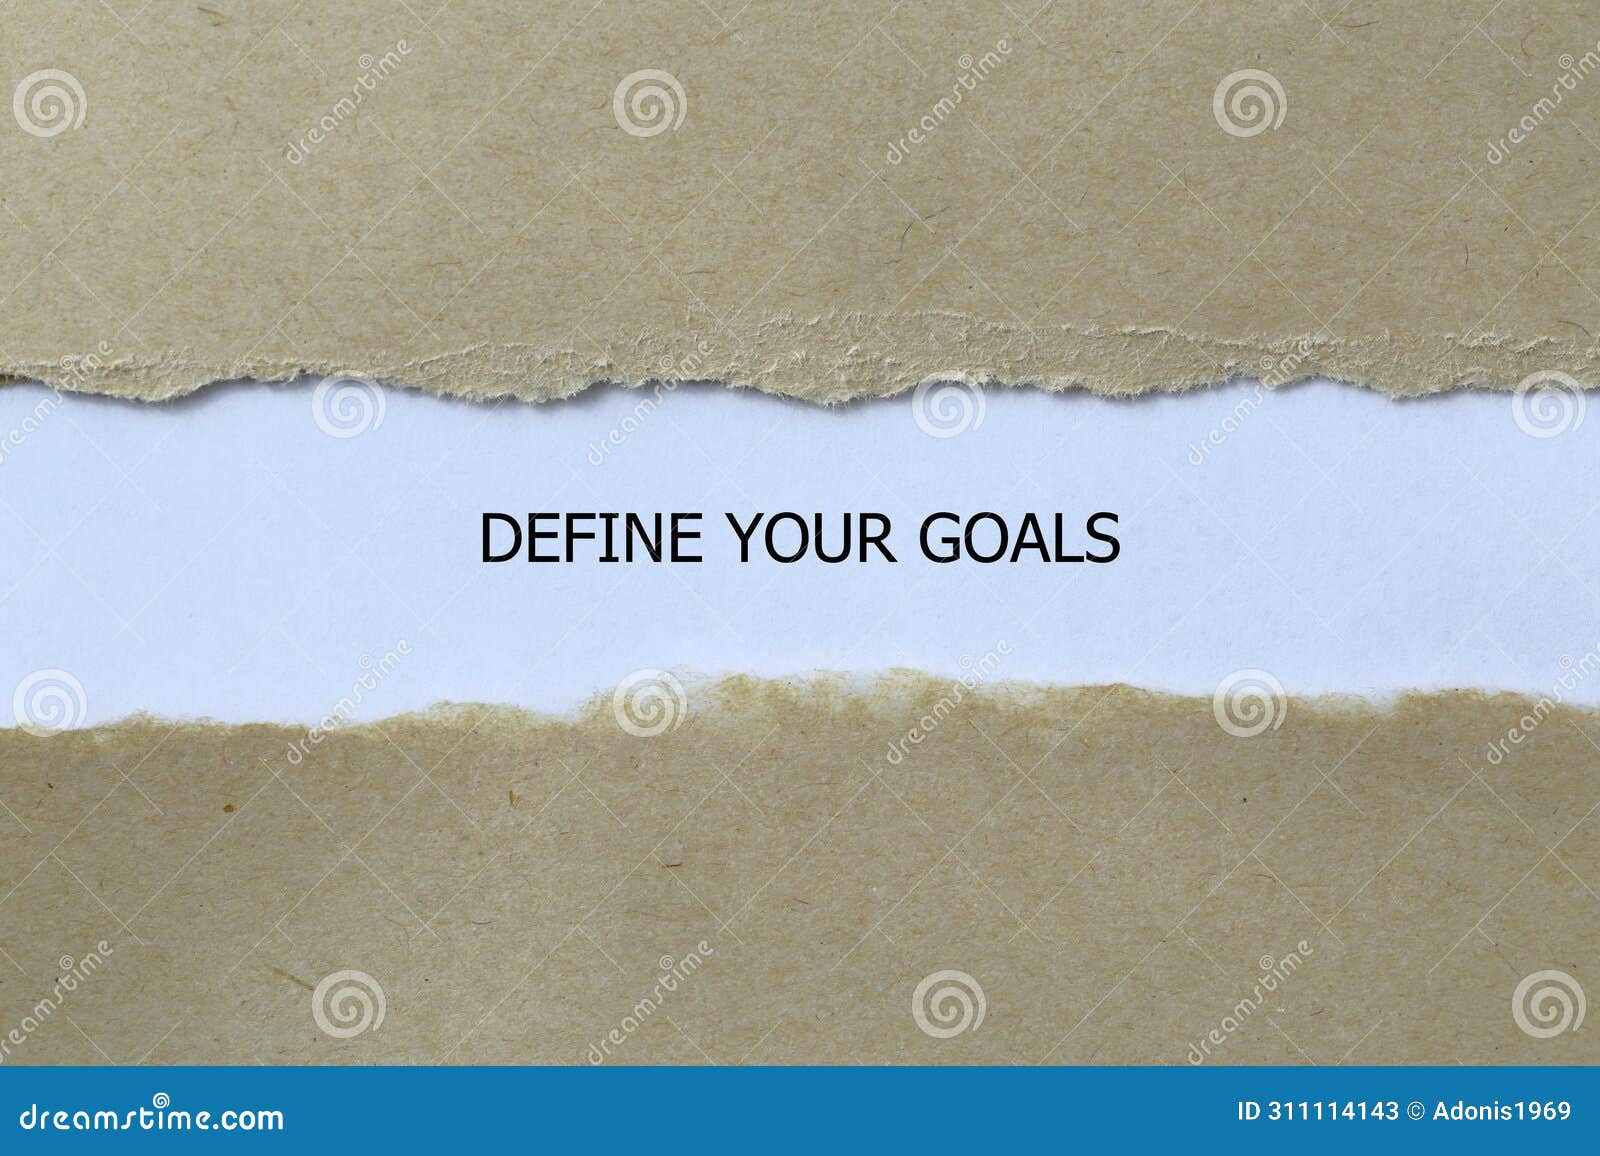 define your goals on white paper